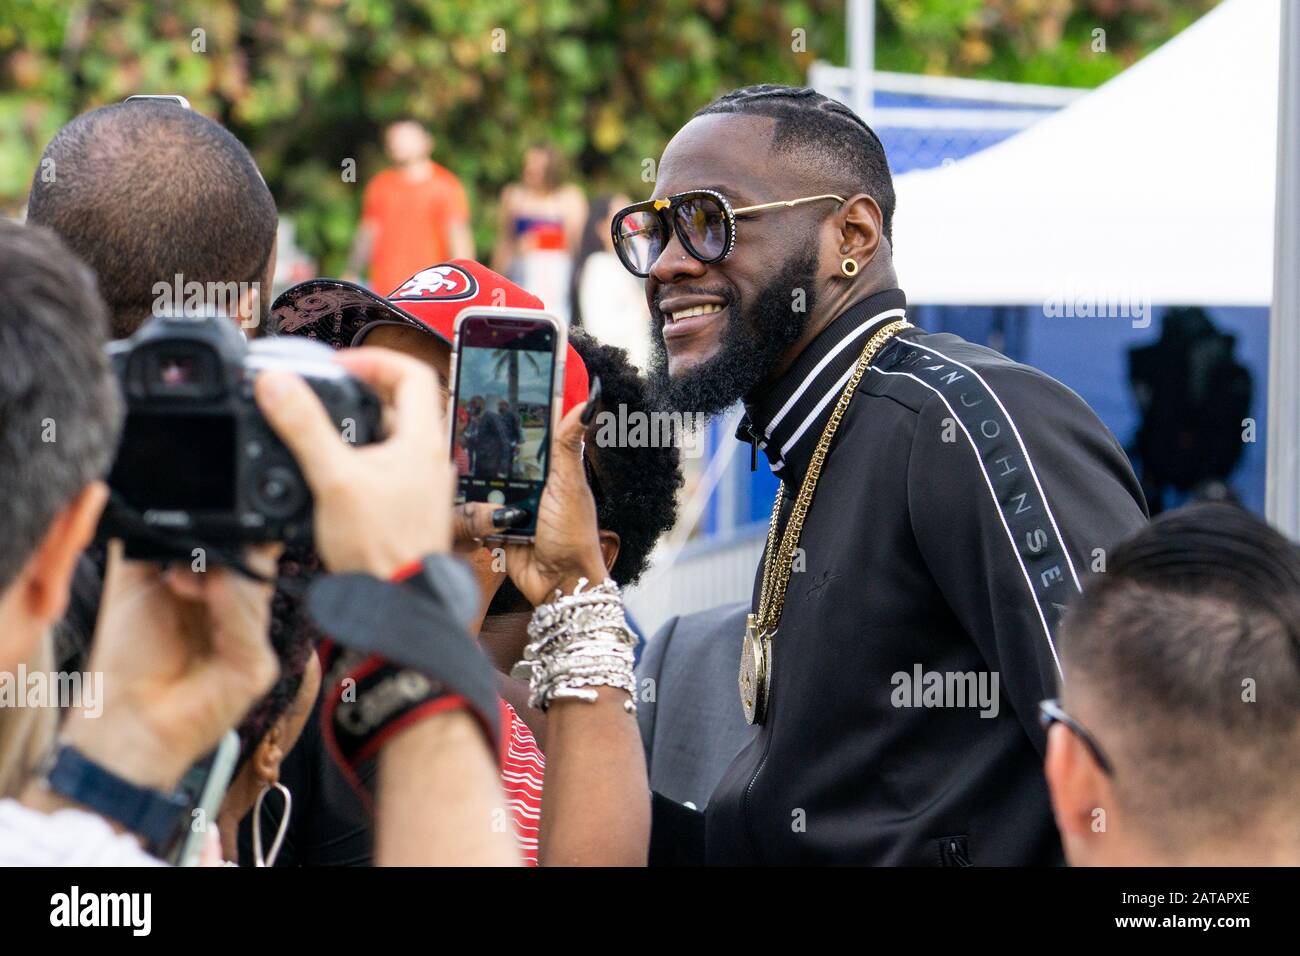 Miami Beach, Floride, États-Unis. 31 janvier 2020. WBC Heavy Weight Bowing Champion Deontay Wilder au Super Bowl LIV Experience à Miami Beach, FL 31 janvier 2020. Crédit: Mpi140/Media Punch/Alay Live News Banque D'Images